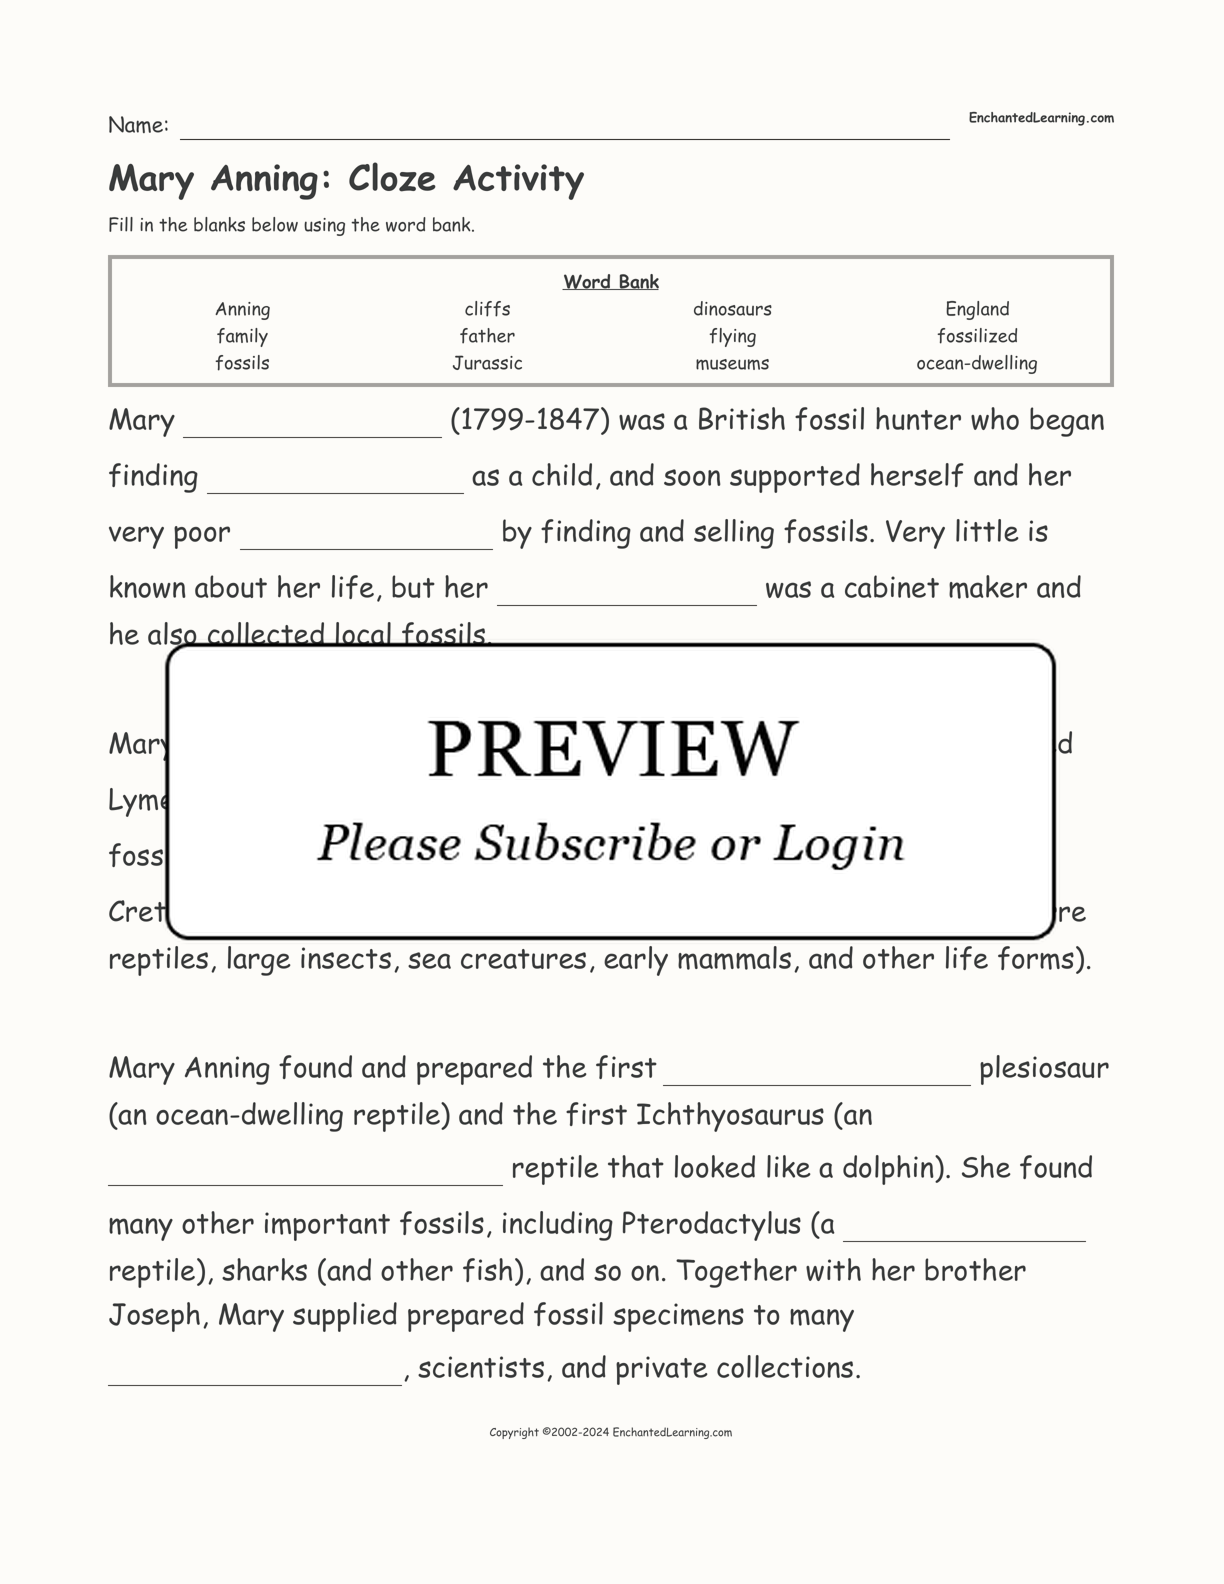 Mary Anning: Cloze Activity interactive worksheet page 1